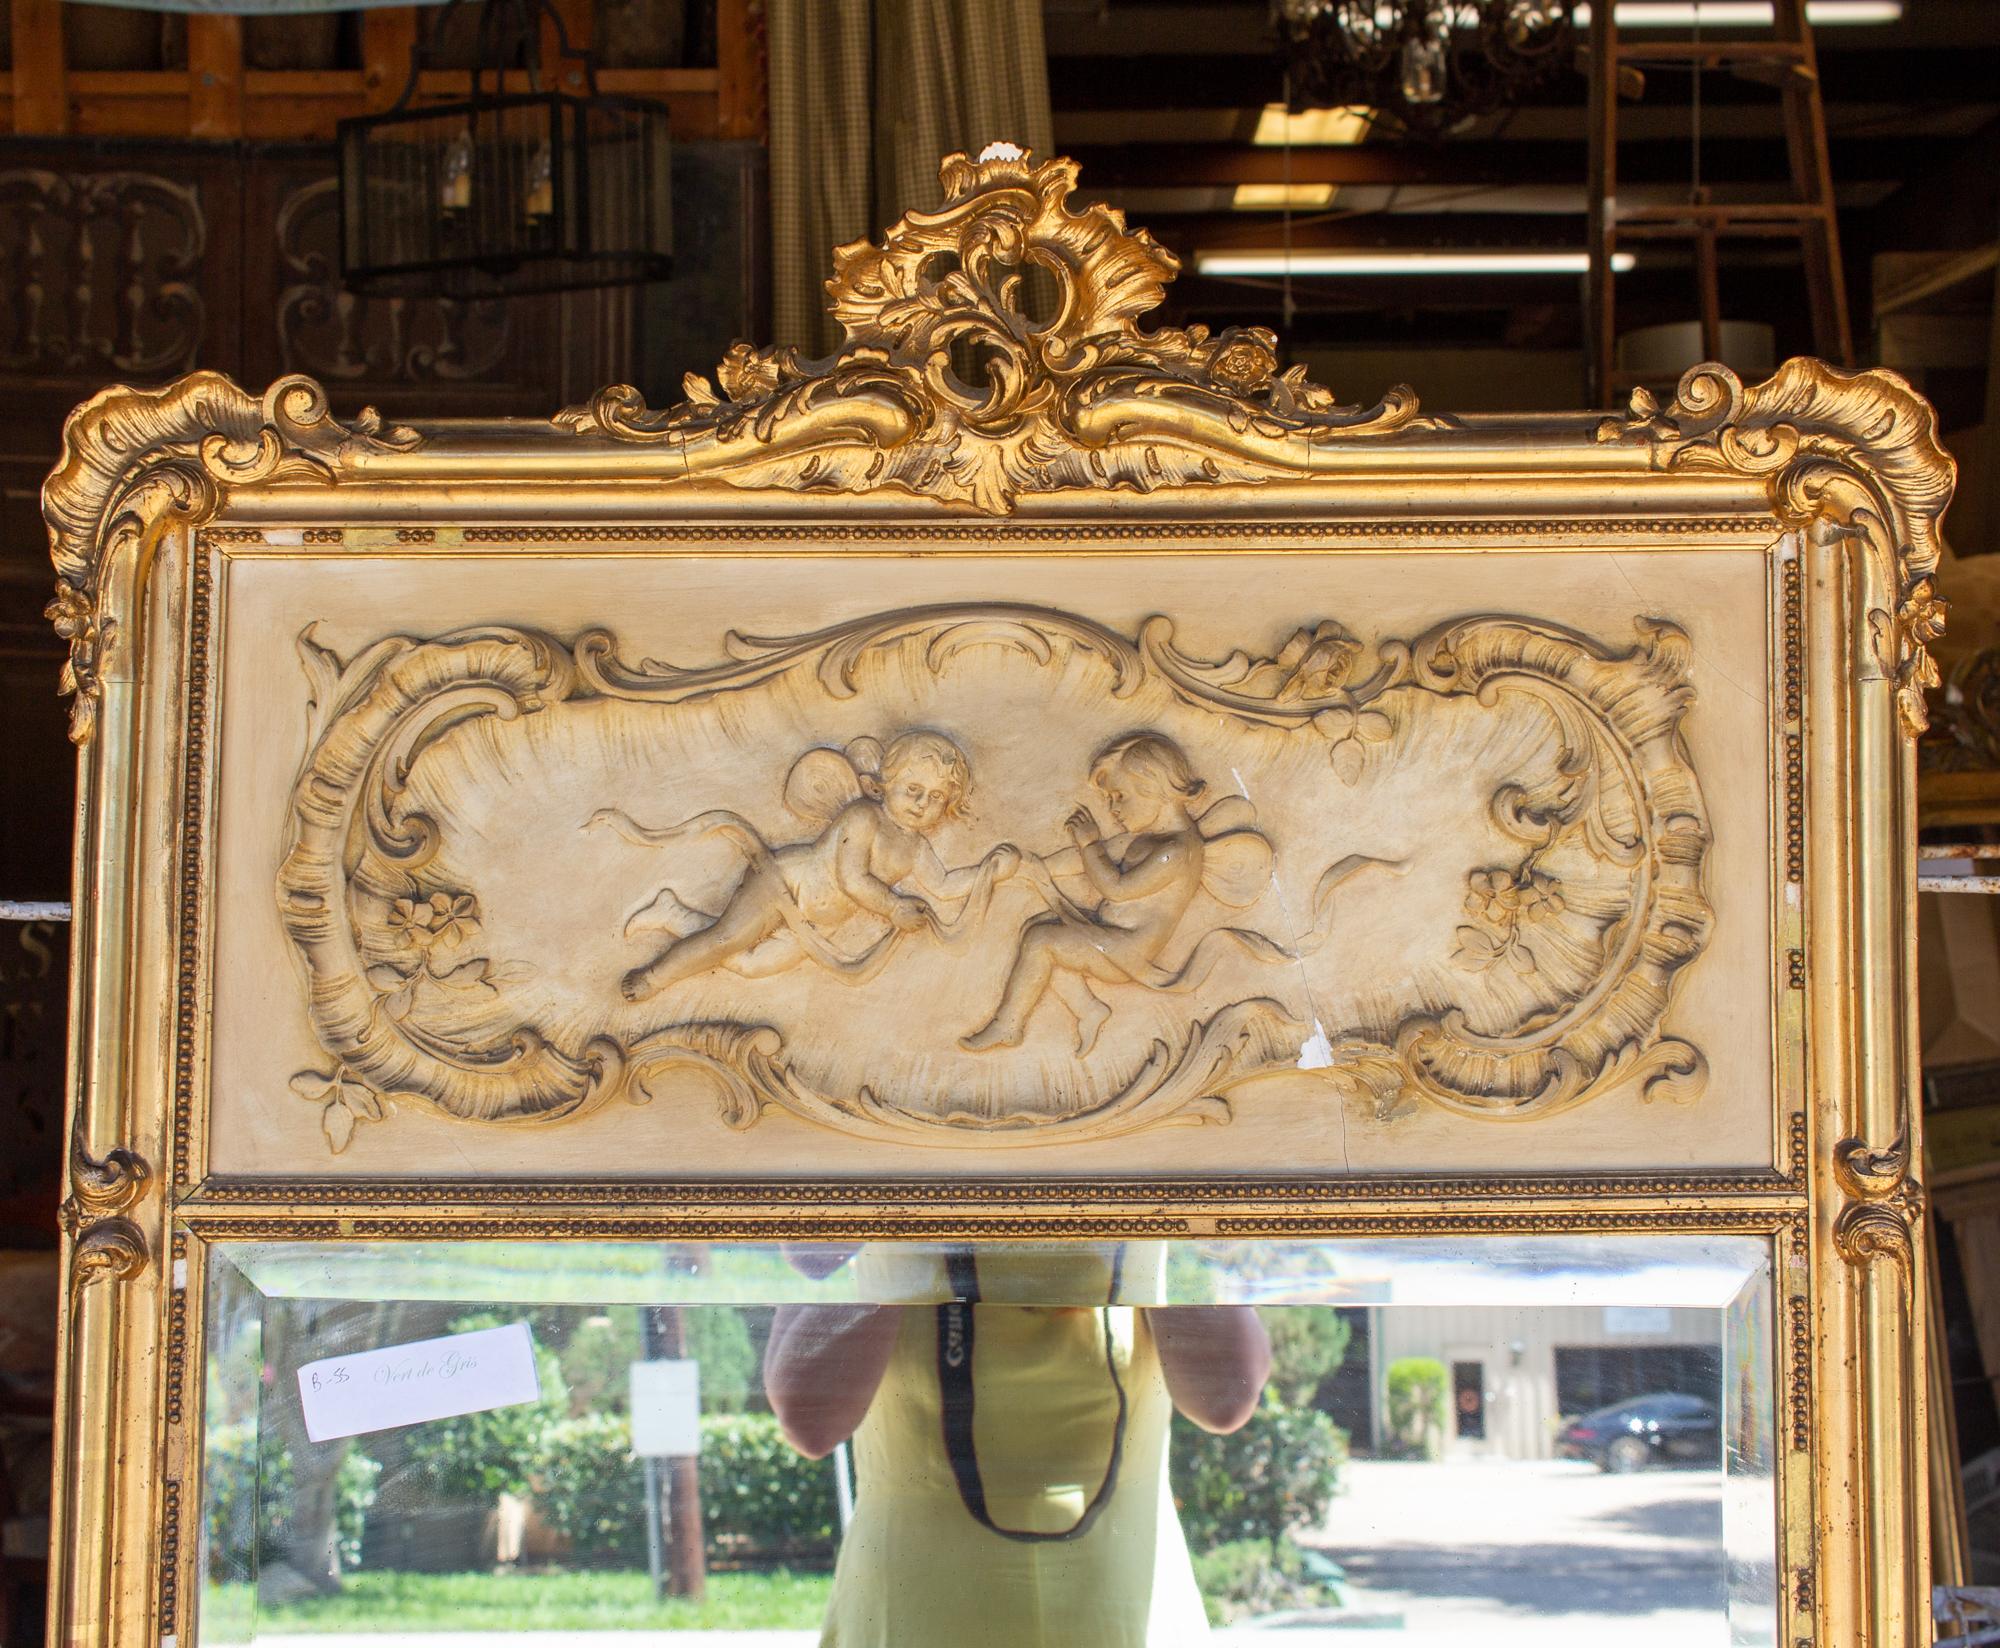 This antique French gilt trumeau mirror has a wonderful plaster panel inset at the top, with two fairy-like figures, scrollwork and floral accents. The mirrored portion features a beveled edge and the frame has decorative accents at the corners and